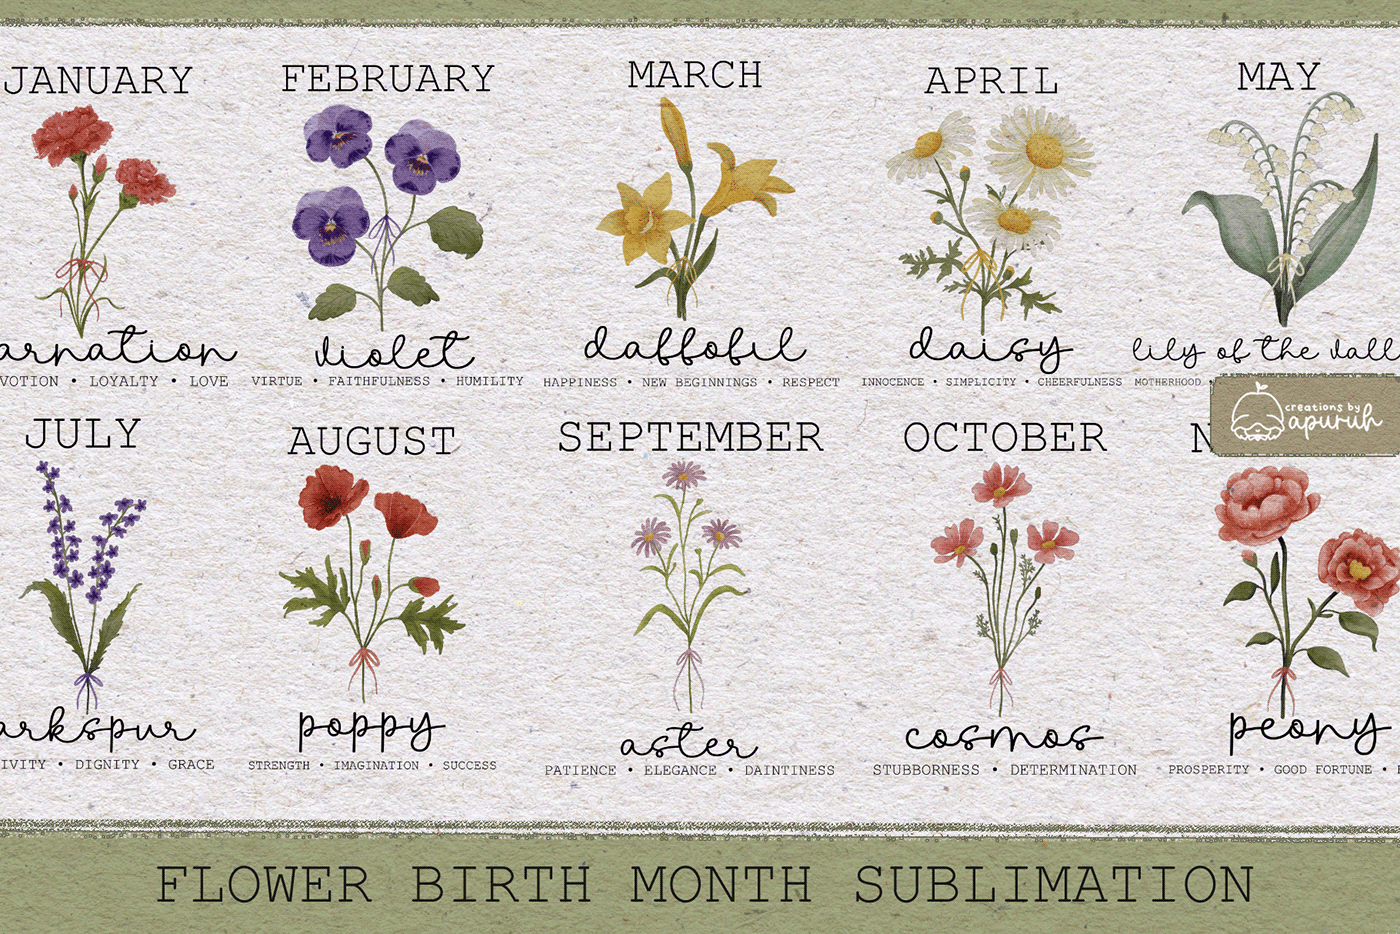 Watercolor clipart hand drawn T-Shirt Design Birth Month Flower flower month meaning flower sublimation flower text meaning